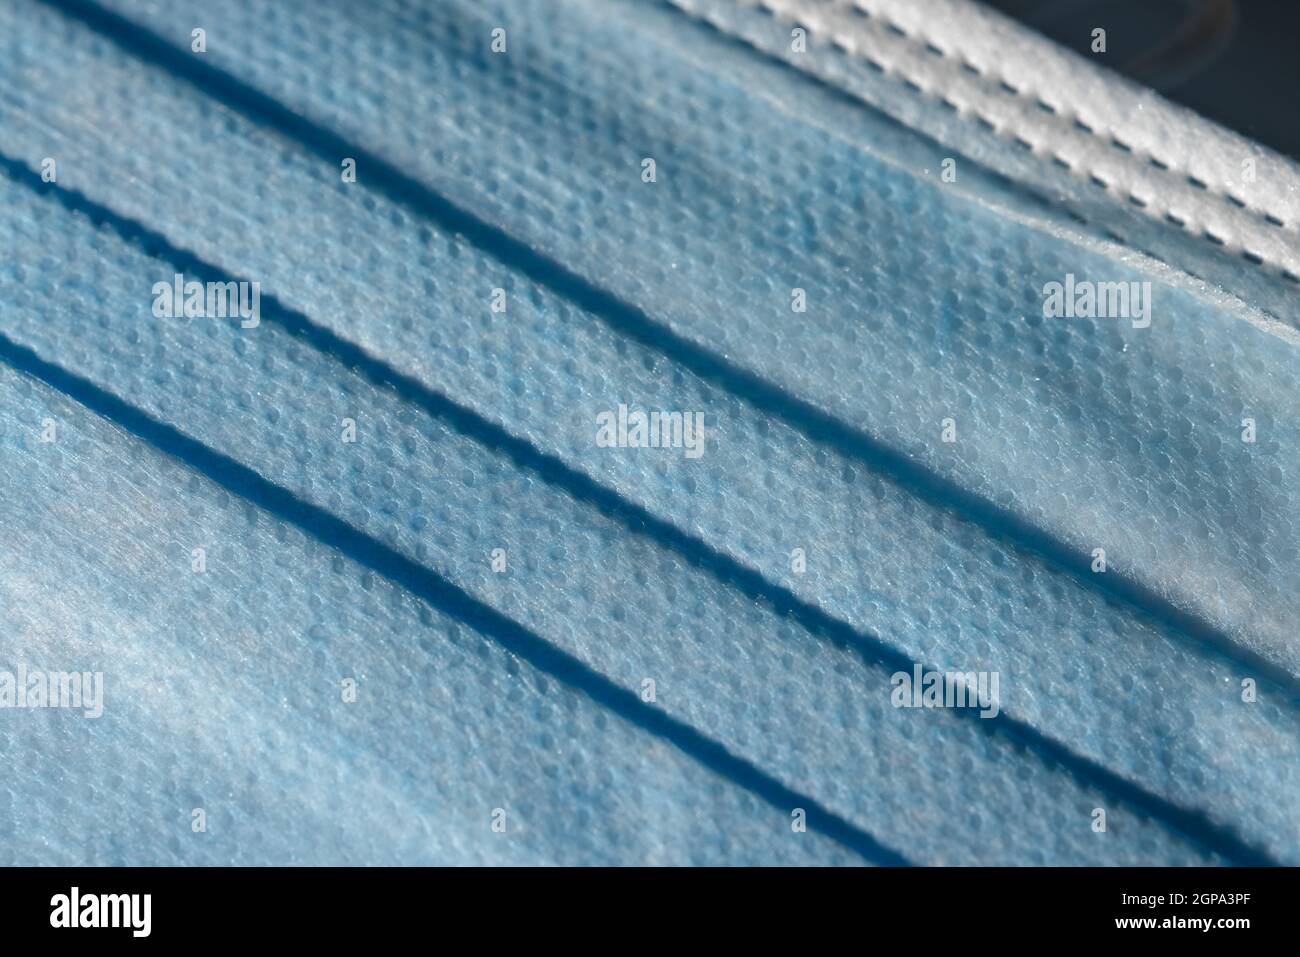 Blue dimpled texture and folds of a disposable 3-ply medical face mask. Mandatory use for many people in public spaces due to Covid aka coronavirus. Stock Photo